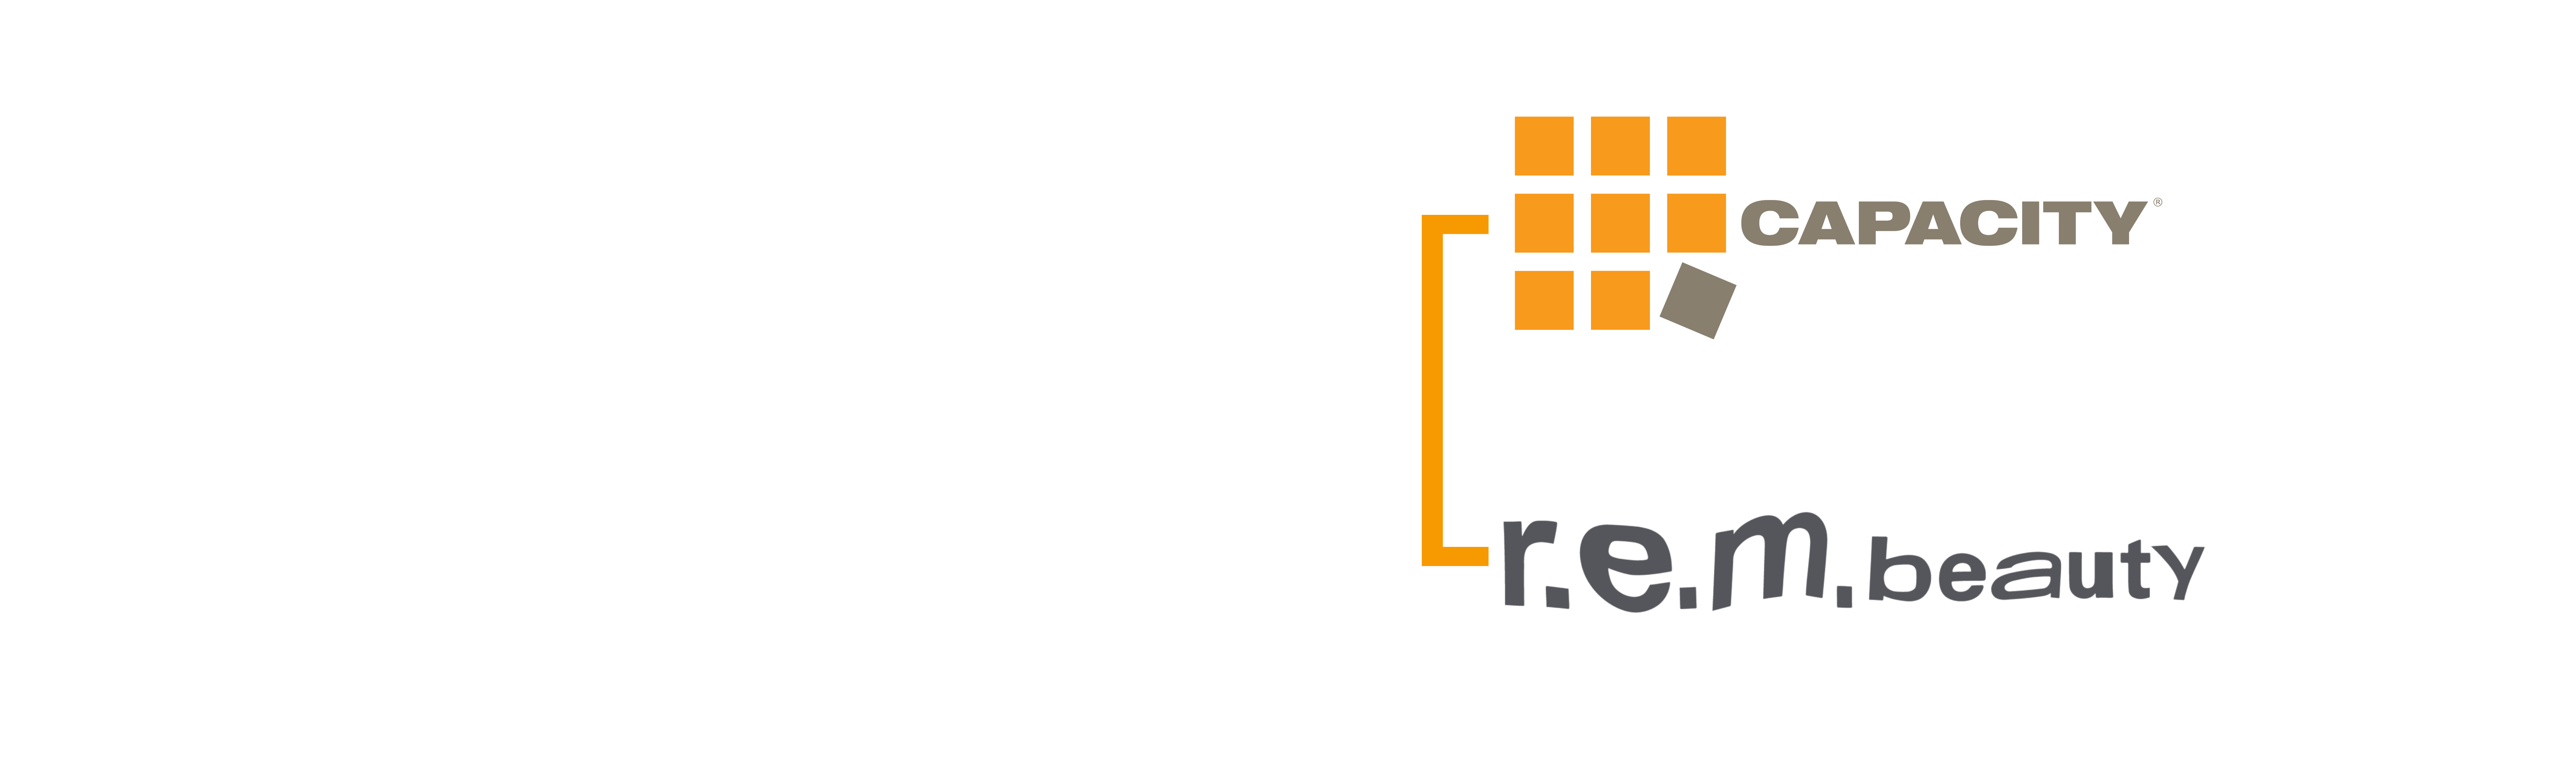 Capacity Revamped r.e.m. beauty’s Ecommerce Fulfillment Operation in 8 Days